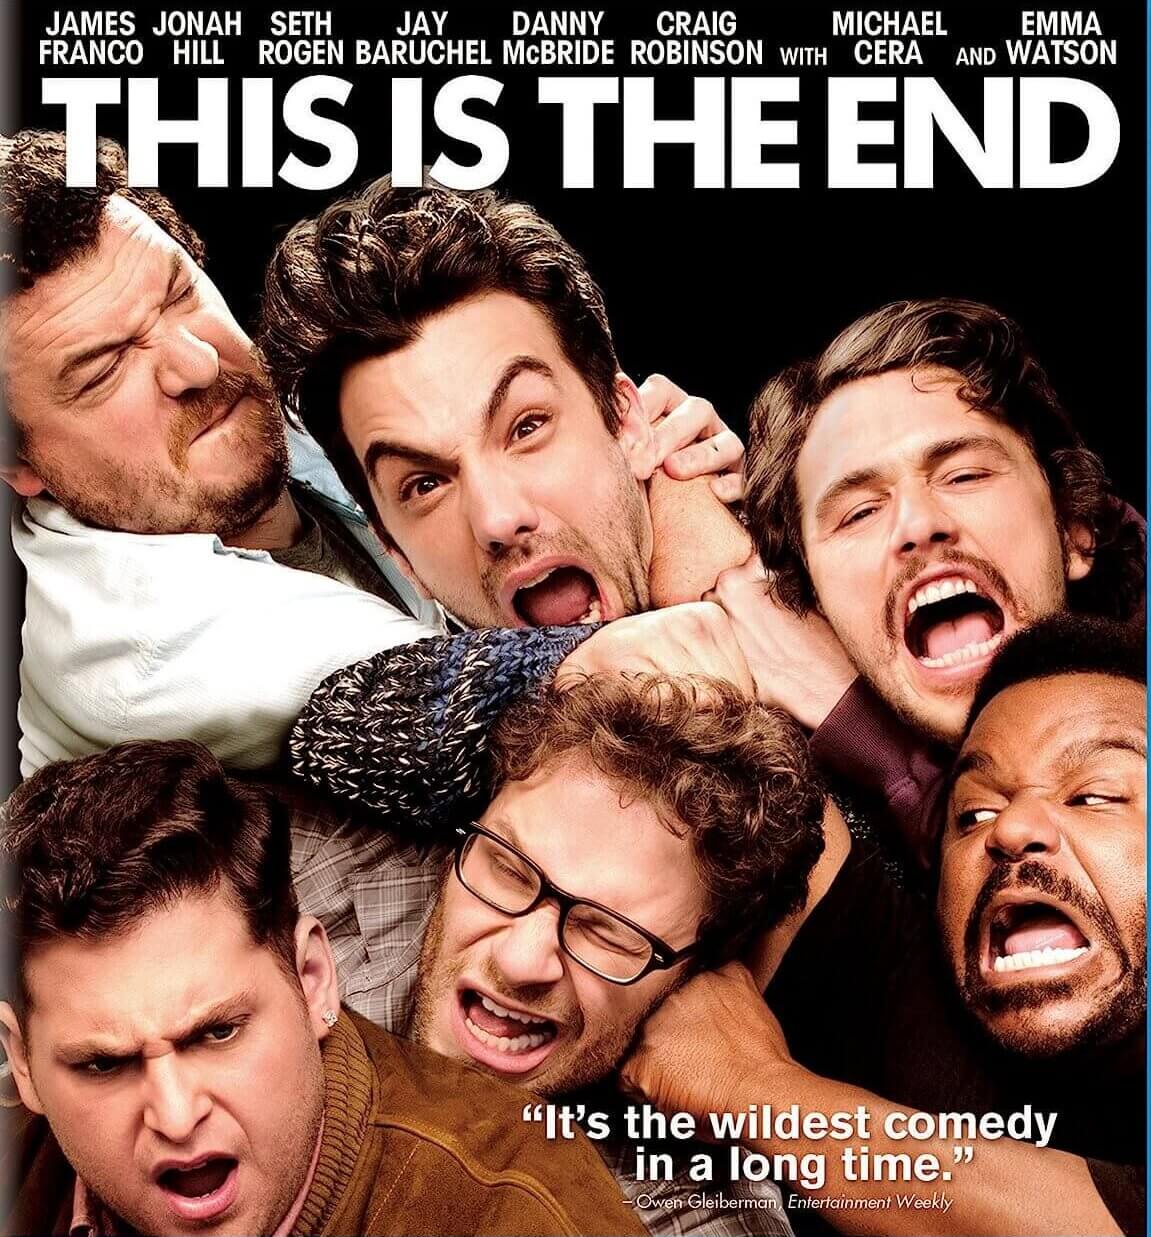 "This is the End" (2013)